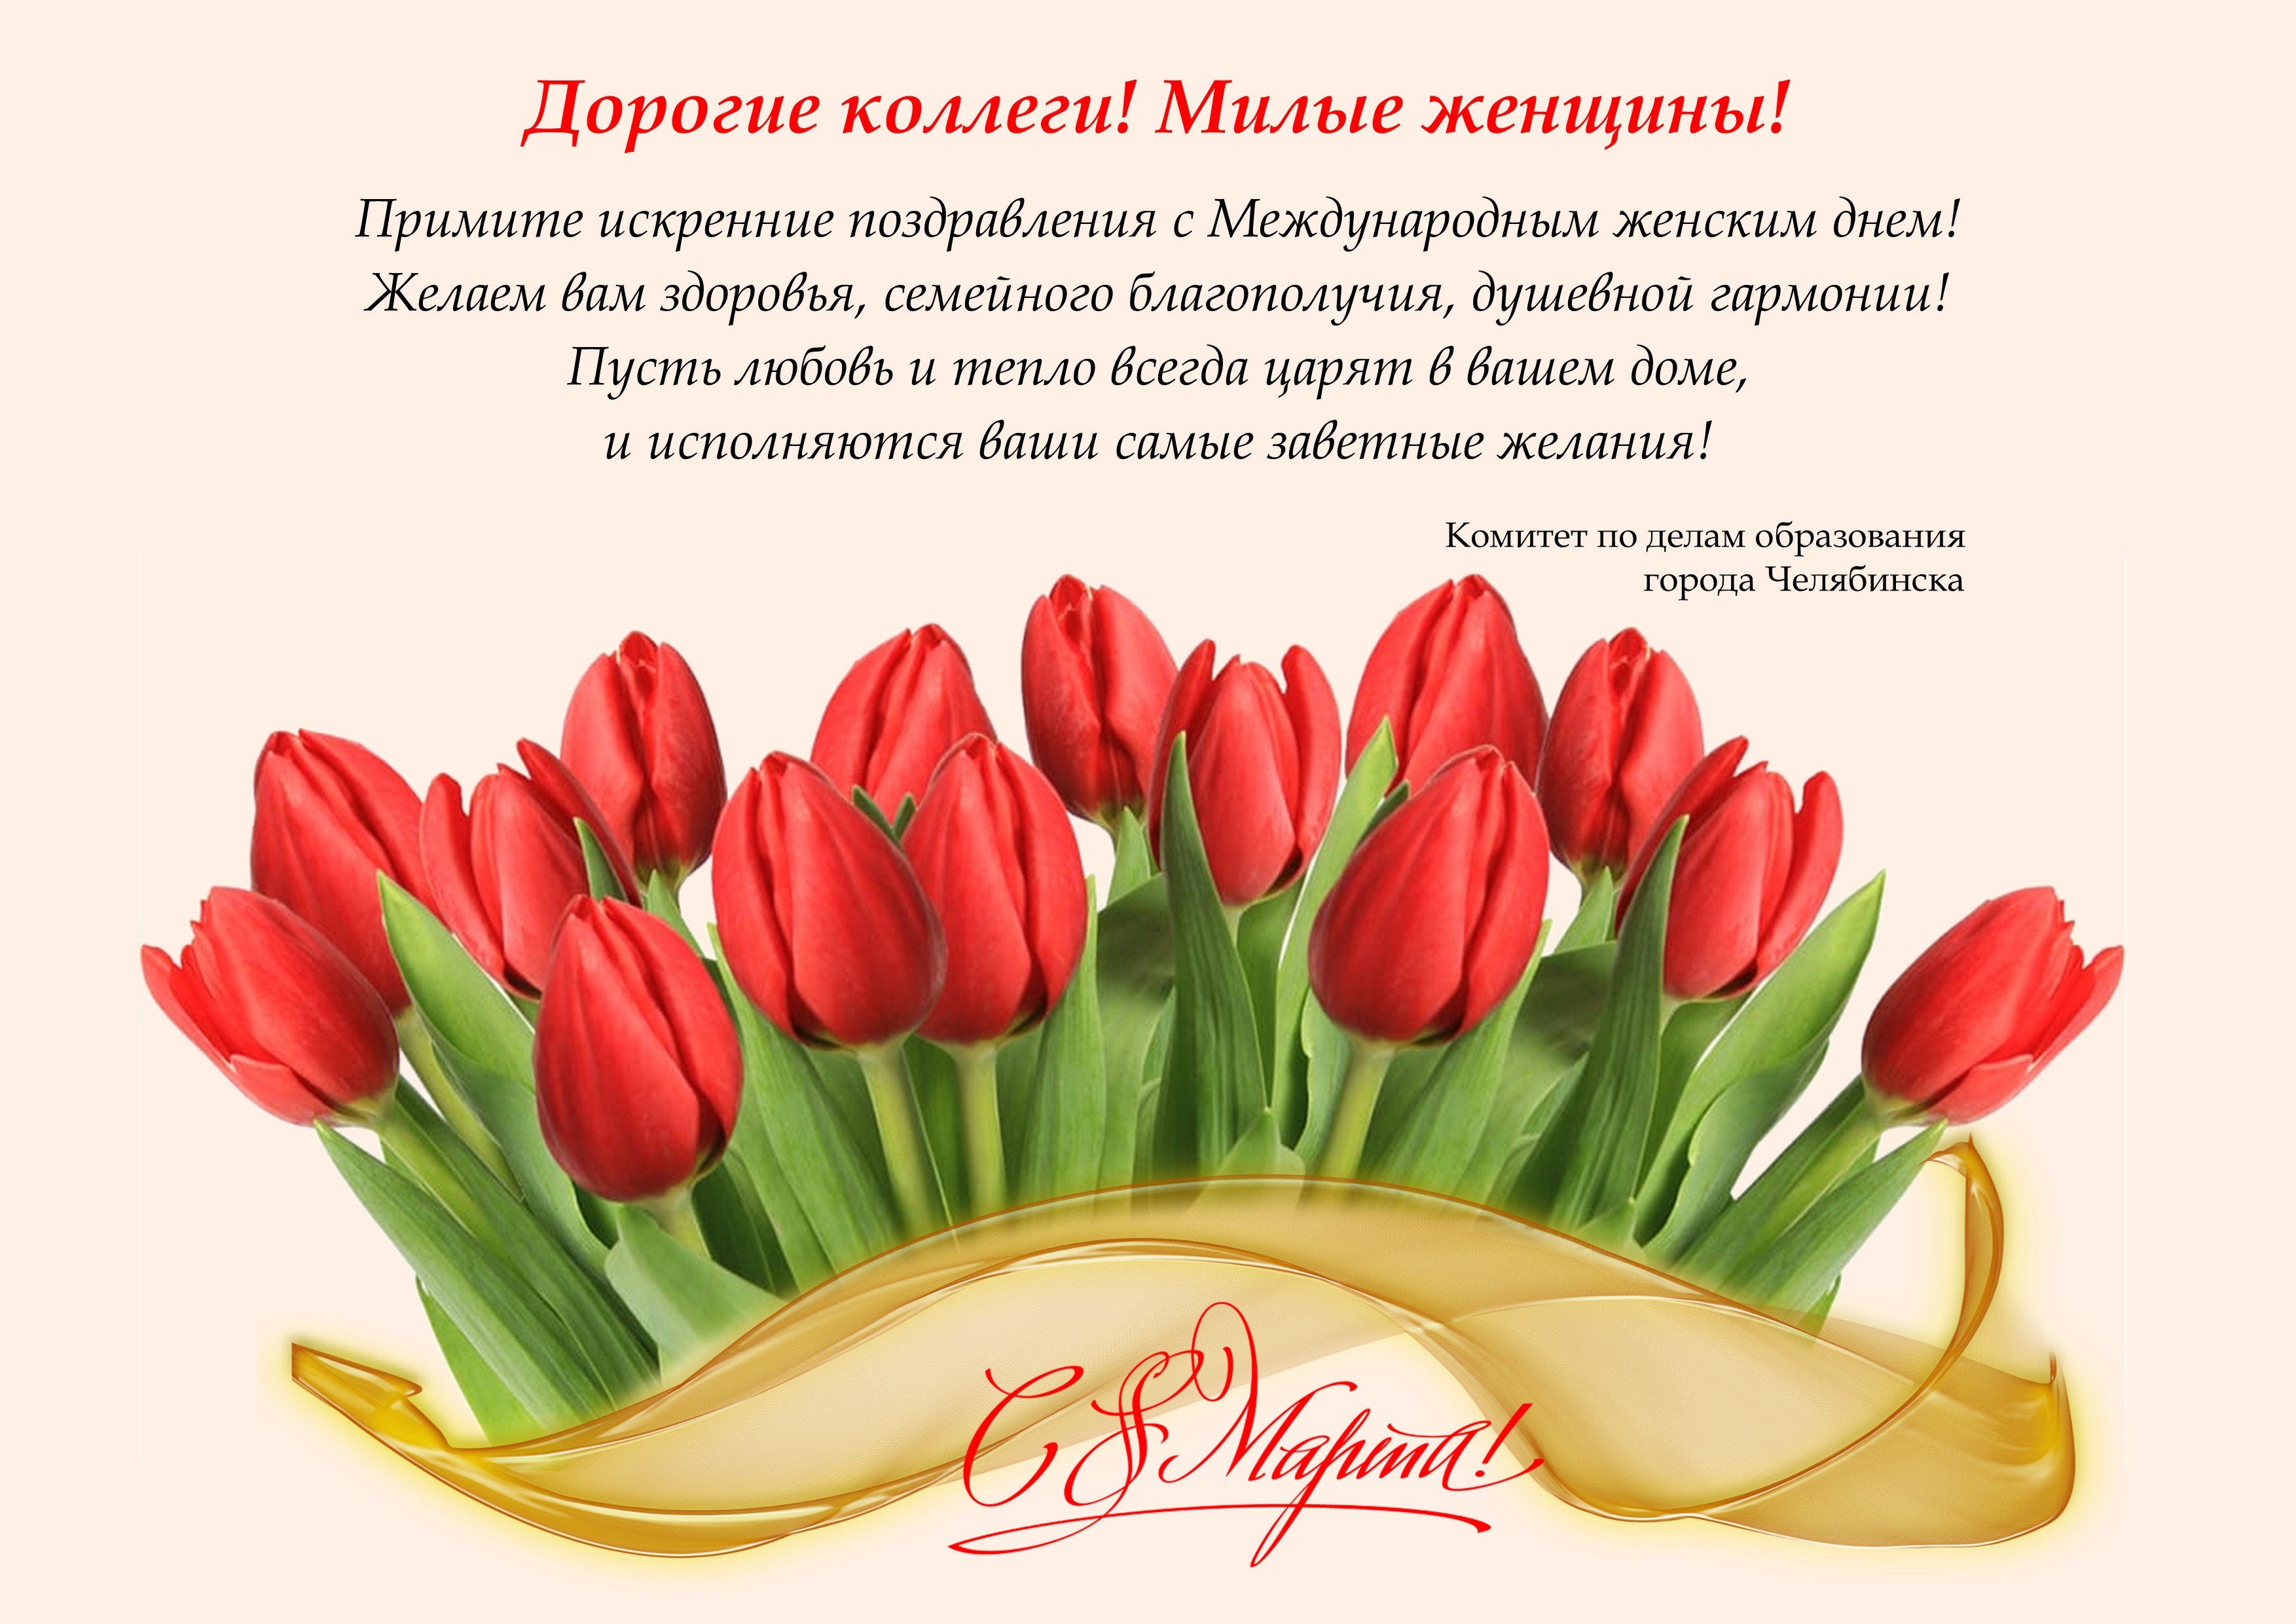 Free postcard Postcard to colleagues on March 8